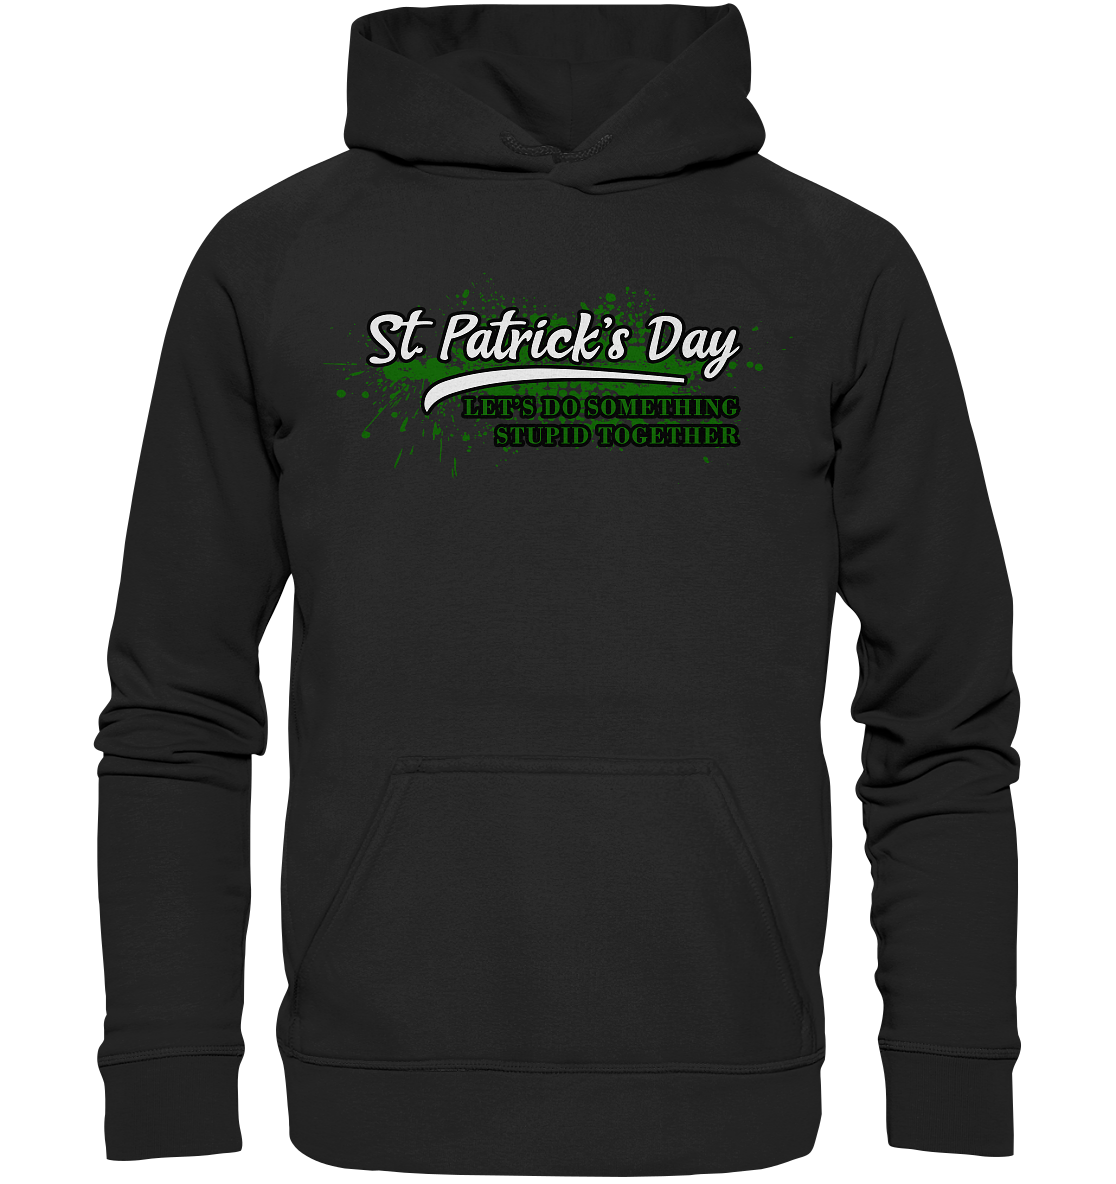 St. Patrick's Day "Let's Do Something Stupid Together" - Basic Unisex Hoodie